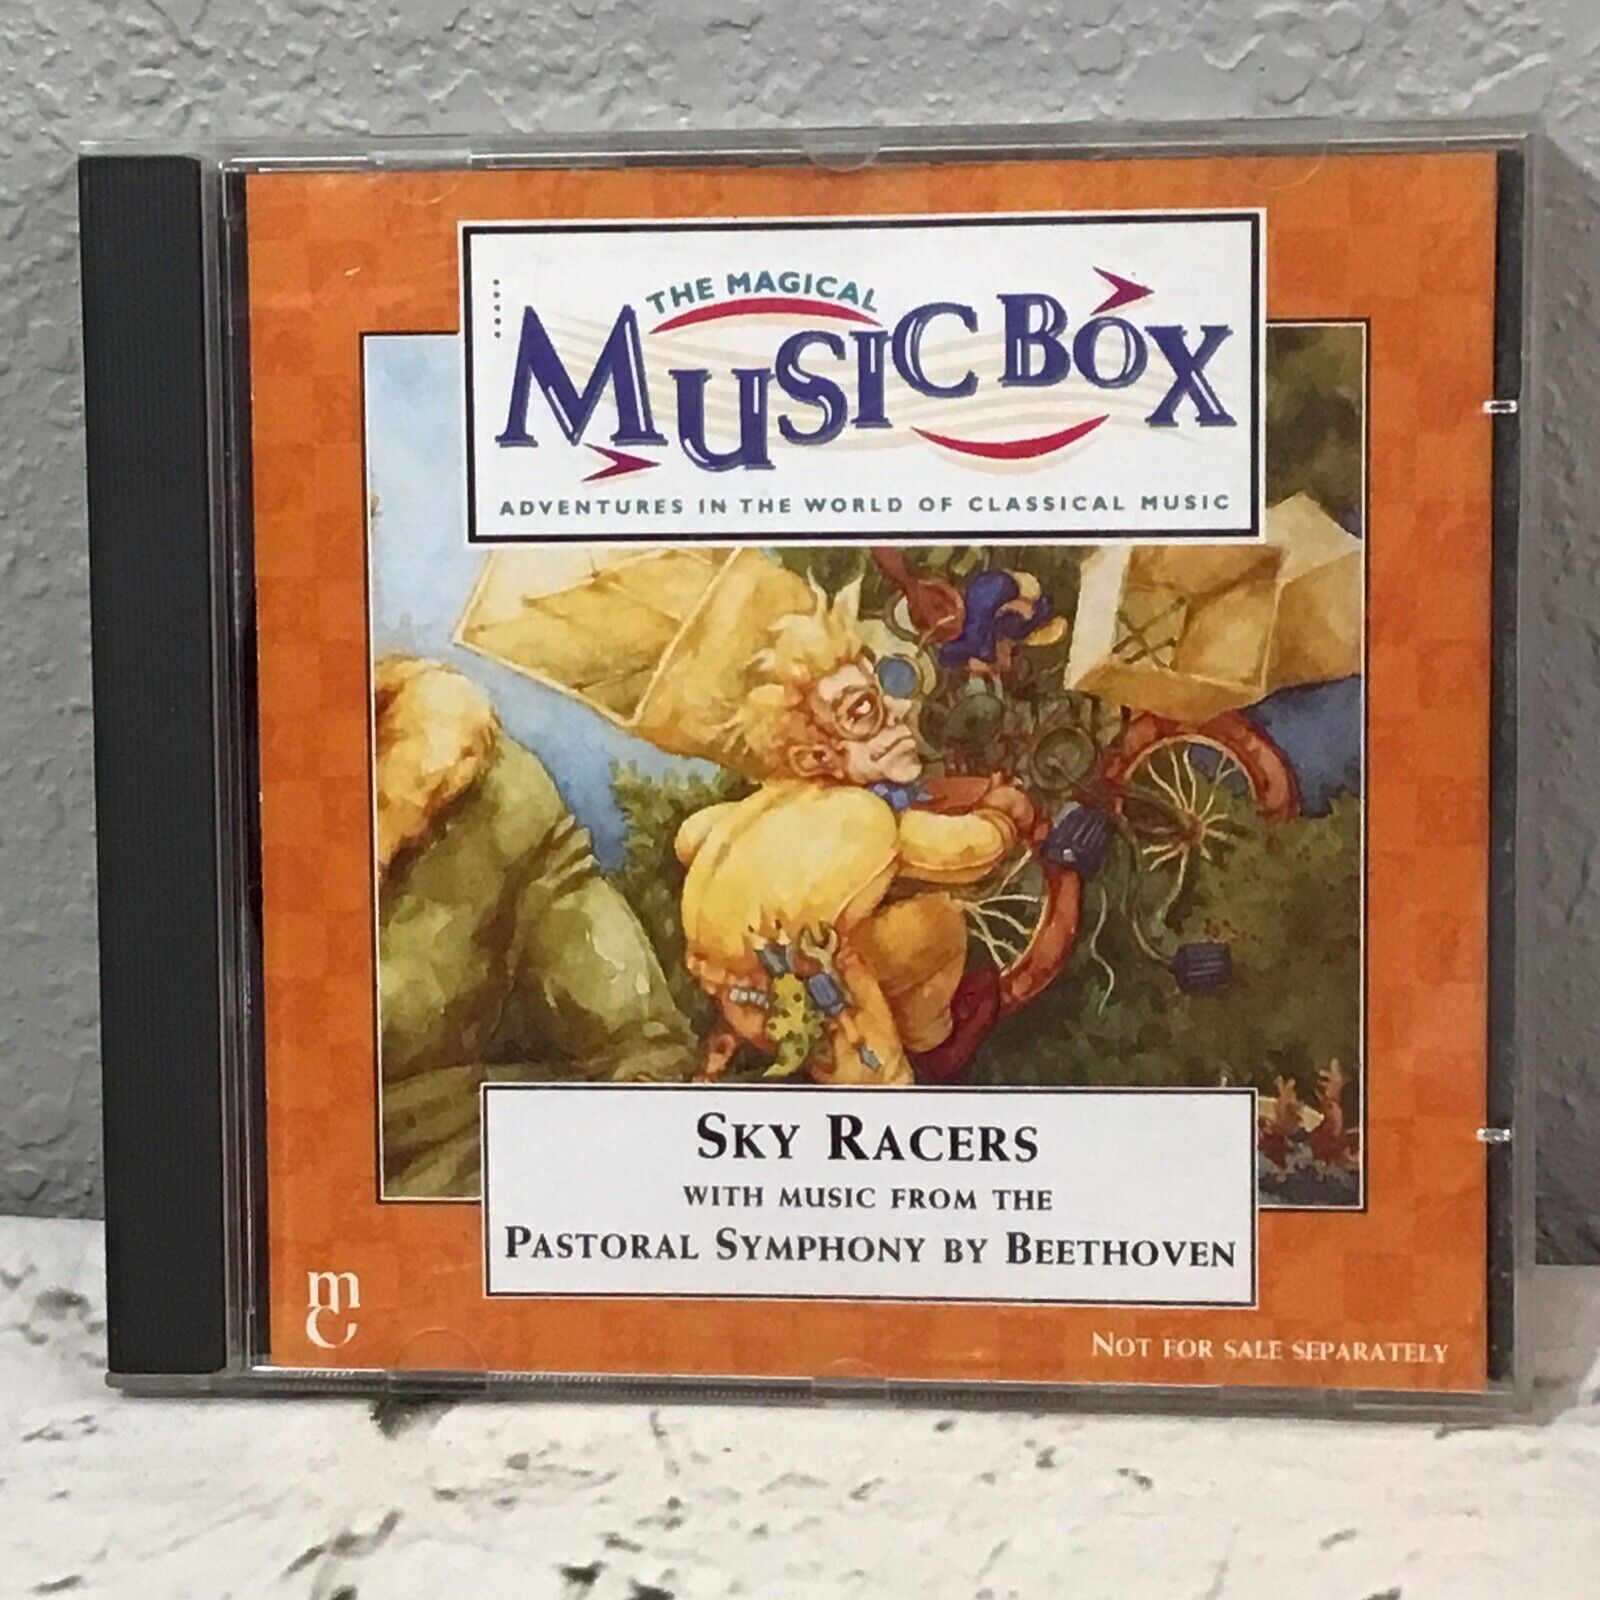 Sky Racers The Pastoral Symphony By Beethoven - CD Magical Music Box